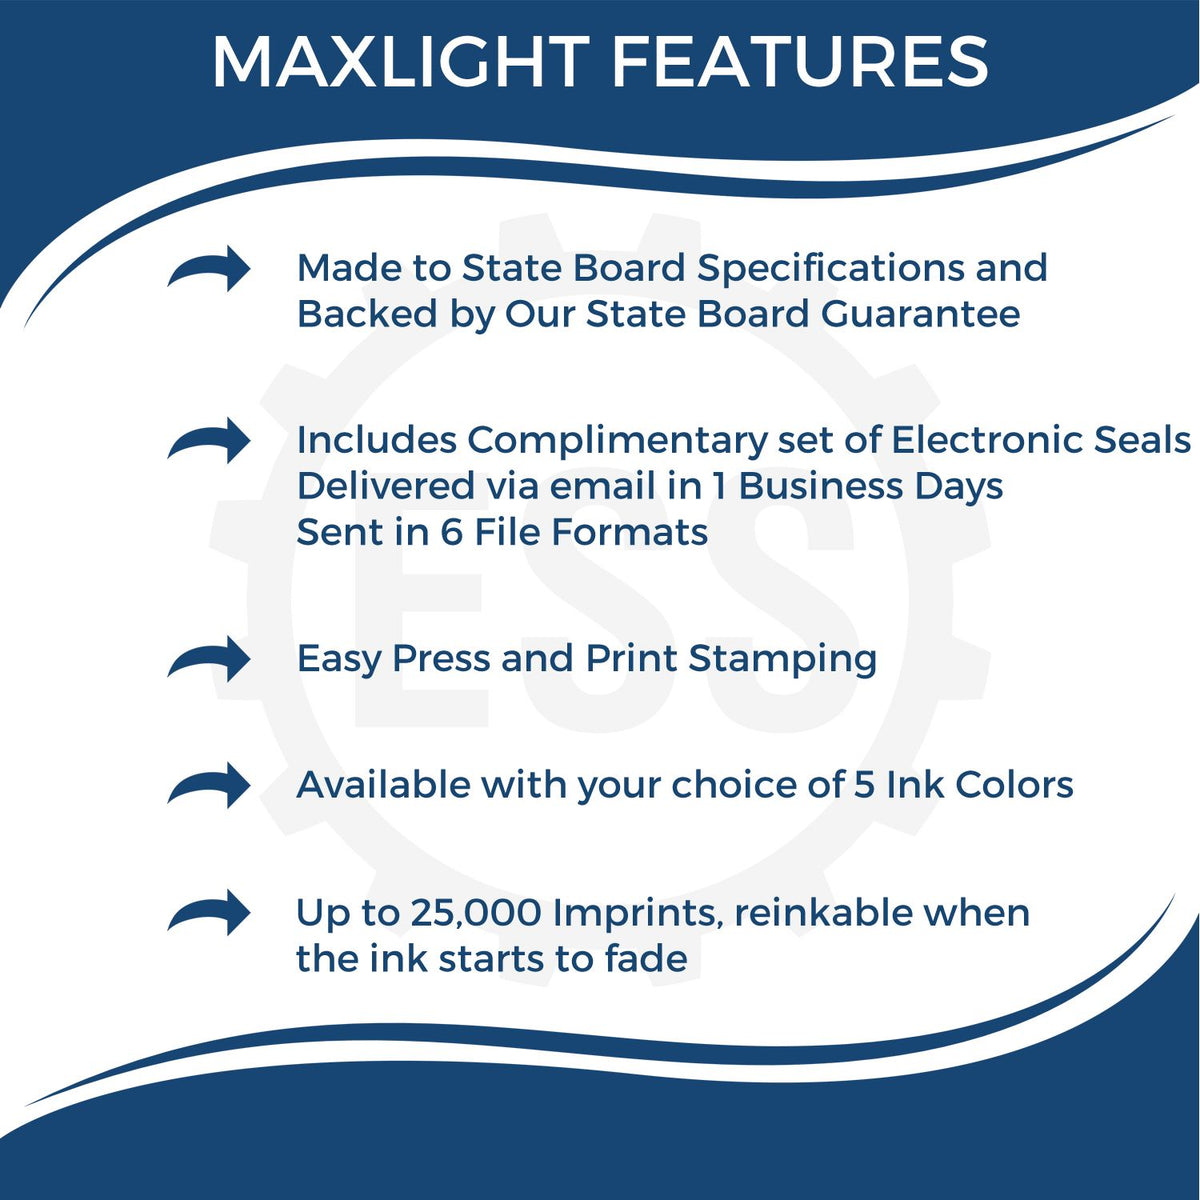 A picture of an infographic highlighting the selling points for the Premium MaxLight Pre-Inked Indiana Landscape Architectural Stamp